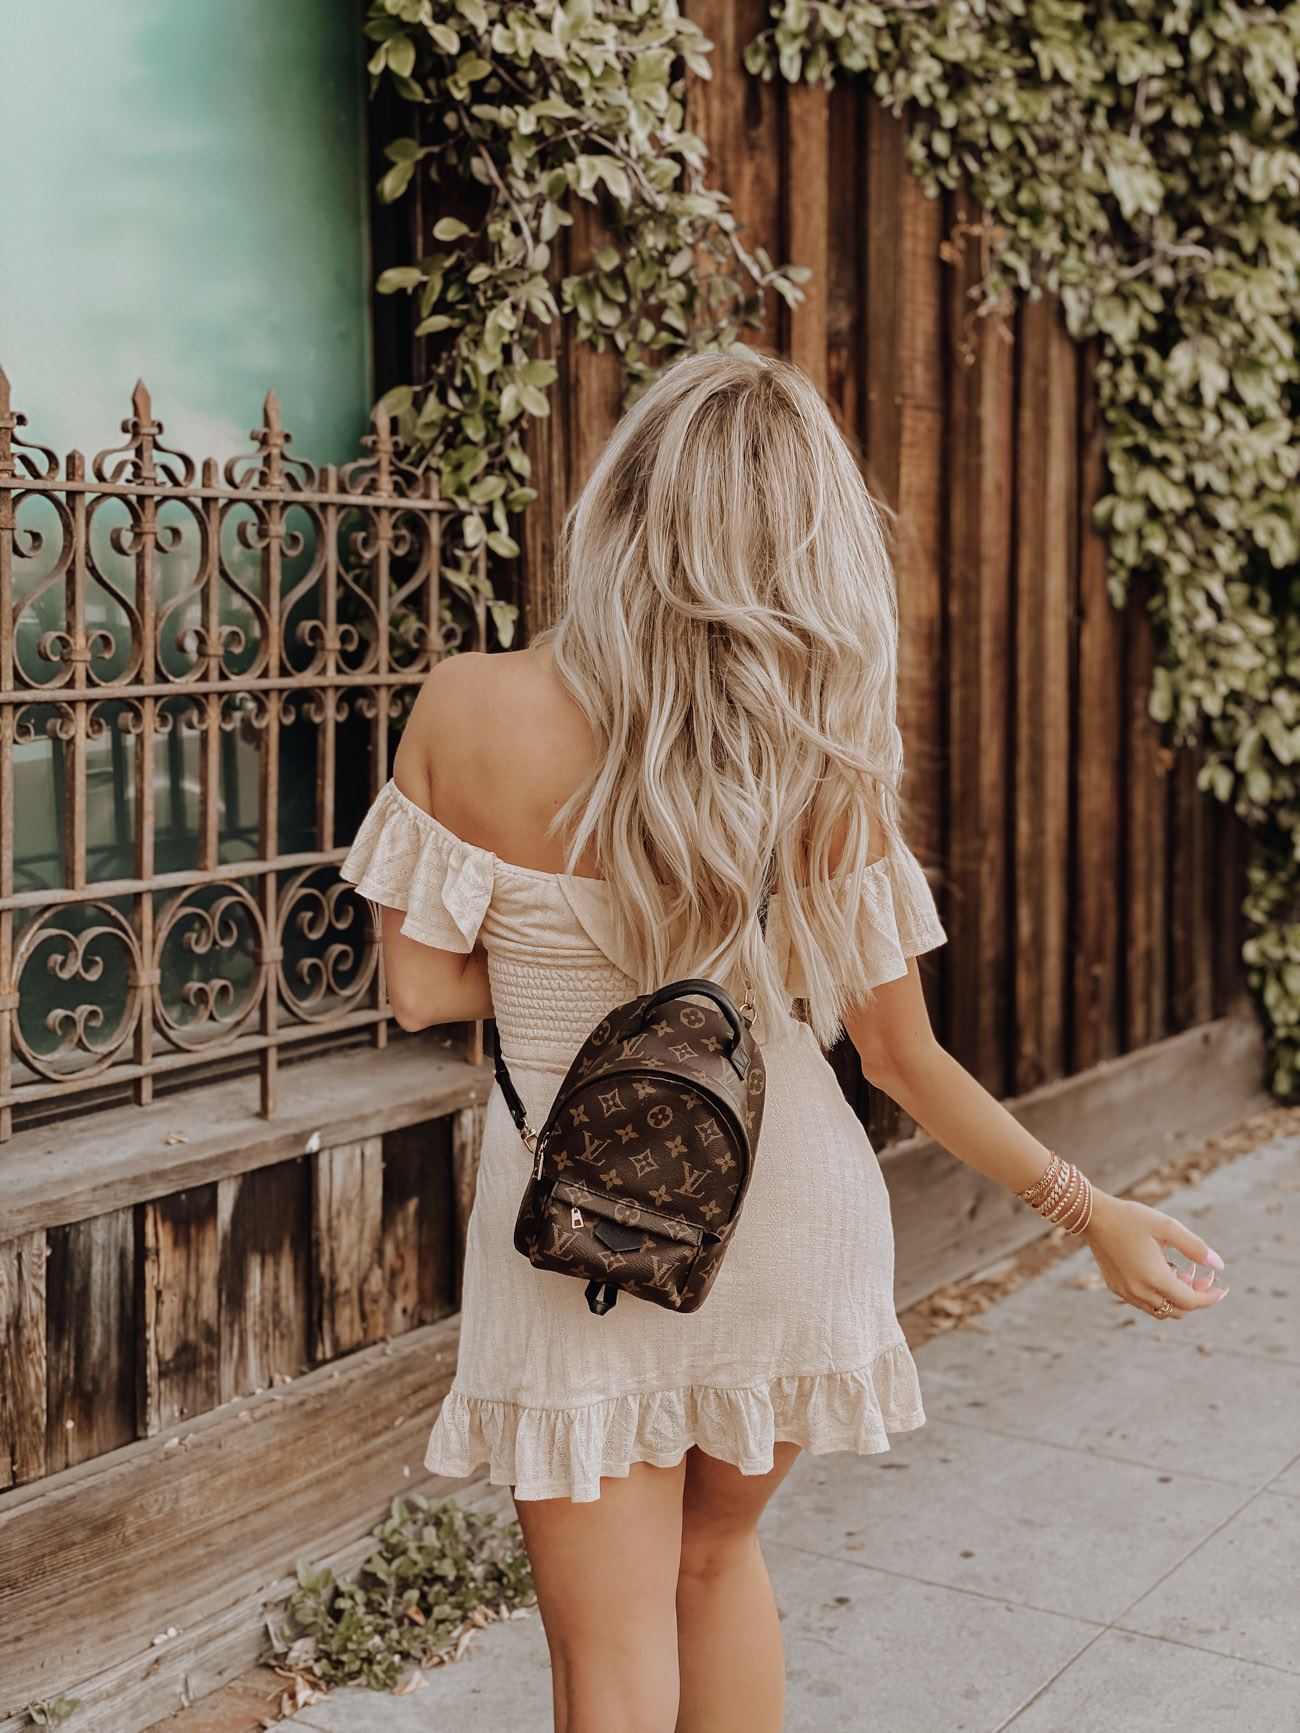 Spring Dress Inspo | Dress & Sneakers | Revolve Dress | Louis Vuitton Backpack | Blondie in the City by Hayley Larue